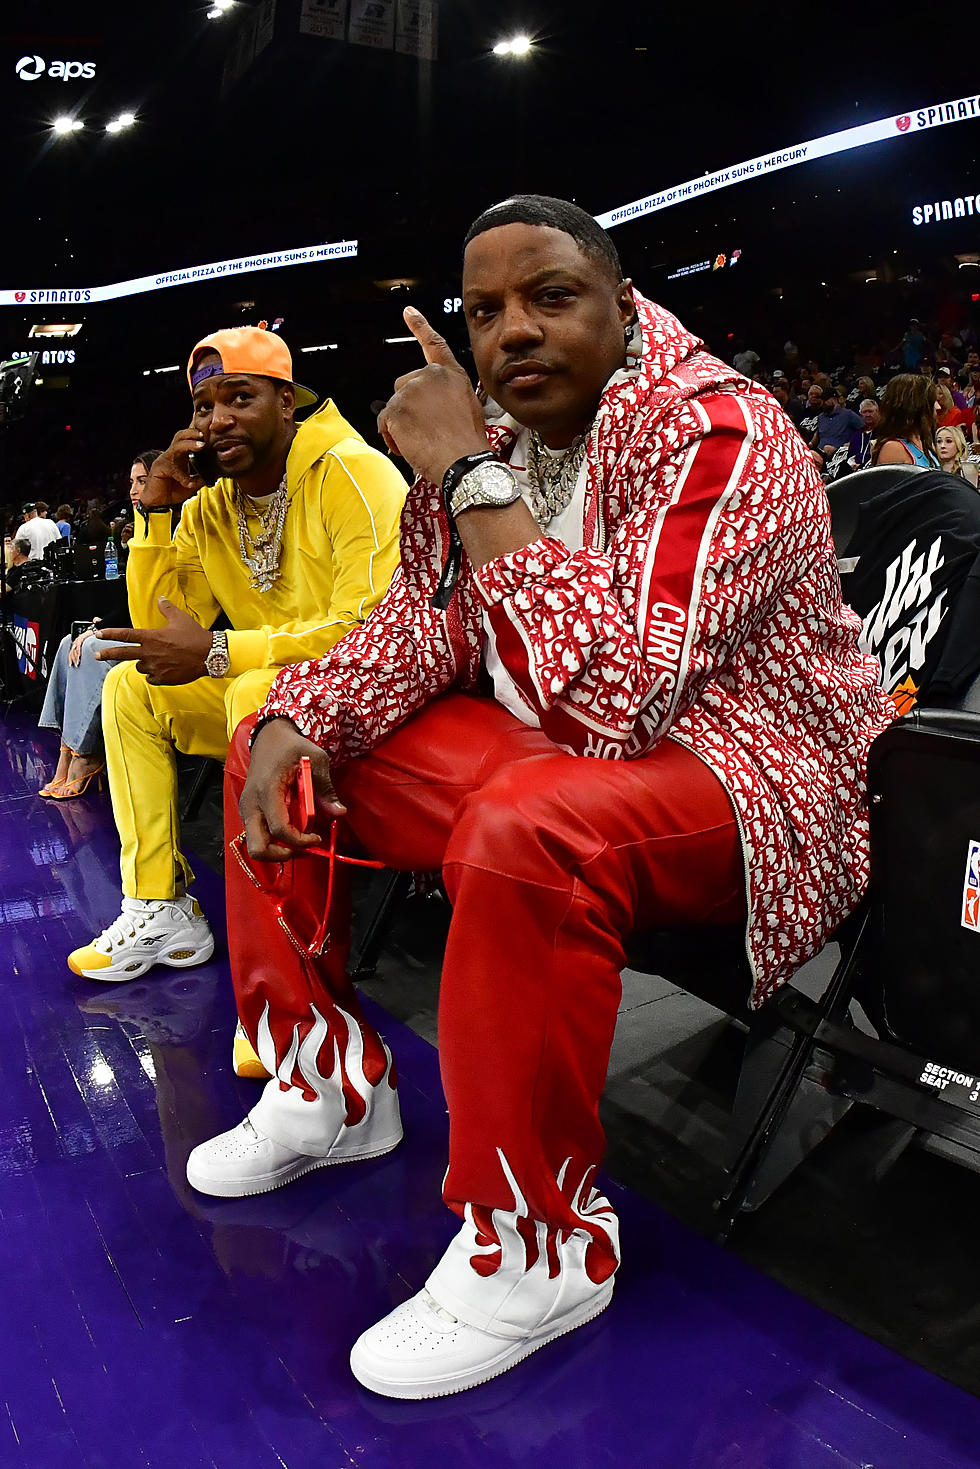 PHOENIX, AZ - MAY 7: Cam'ron and Mase sit court side during the game between the Denver Nuggets and the Phoenix Suns during the Western Conference Semi Finals of the 2023 NBA Playoffs on May 7, 2022 at Footprint Center in Phoenix, Arizona.